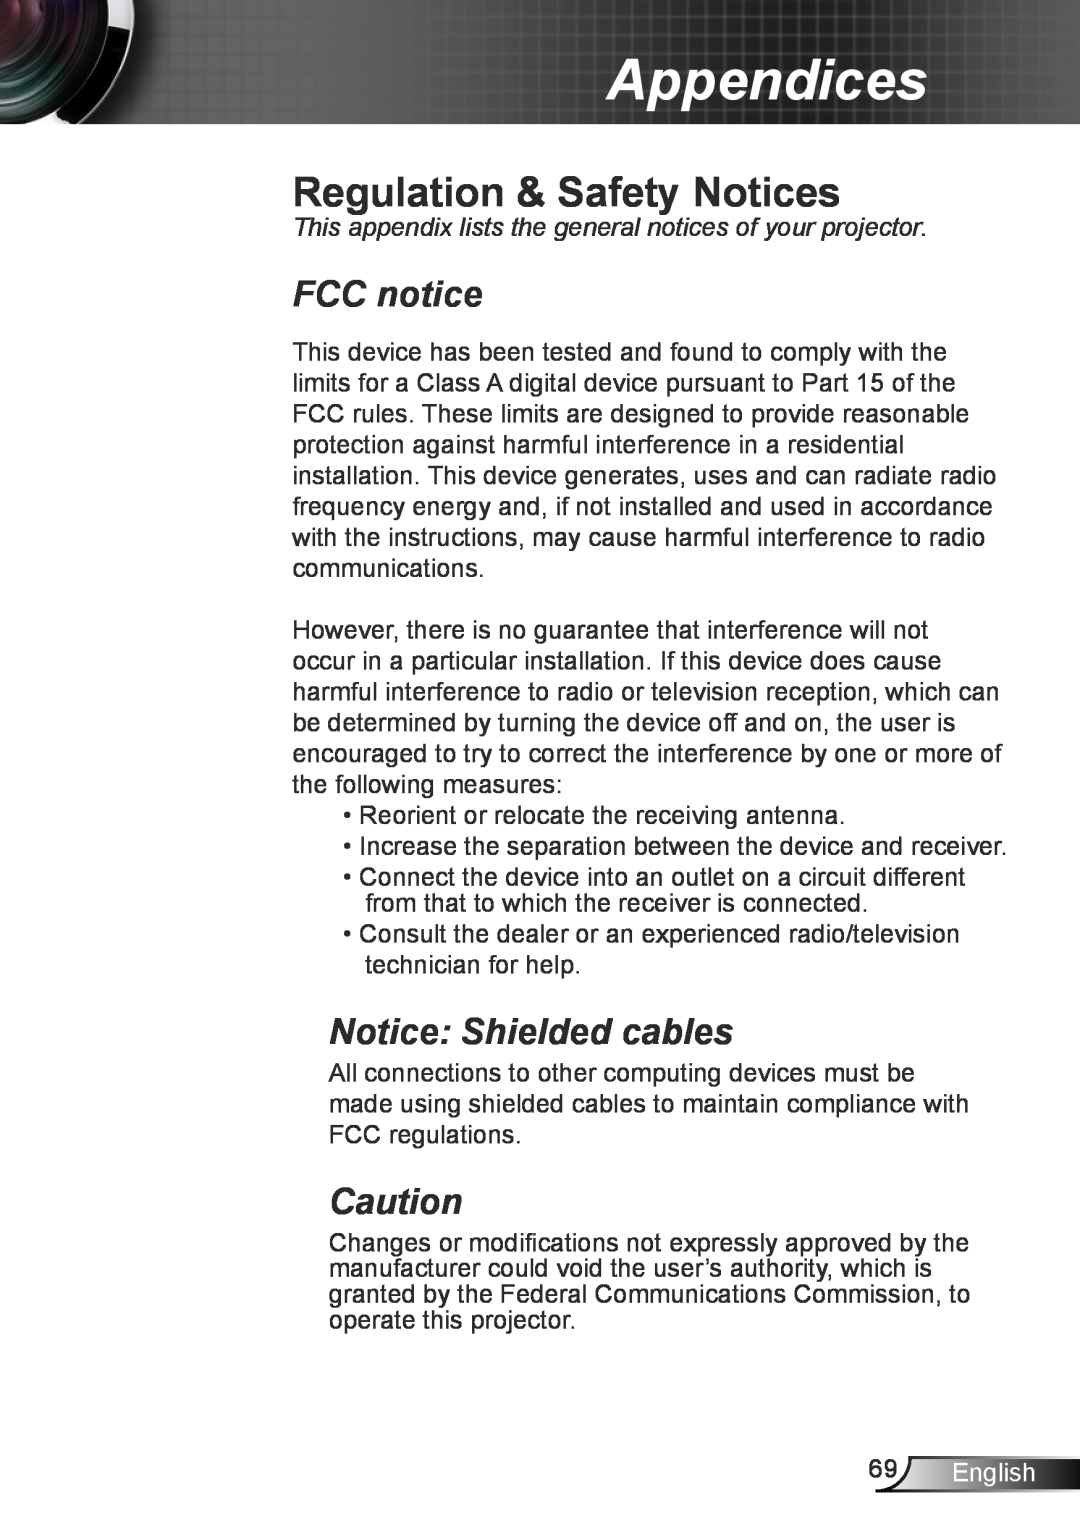 Optoma Technology TH7500NL manual Regulation & Safety Notices, FCC notice, Notice Shielded cables, English, Appendices 